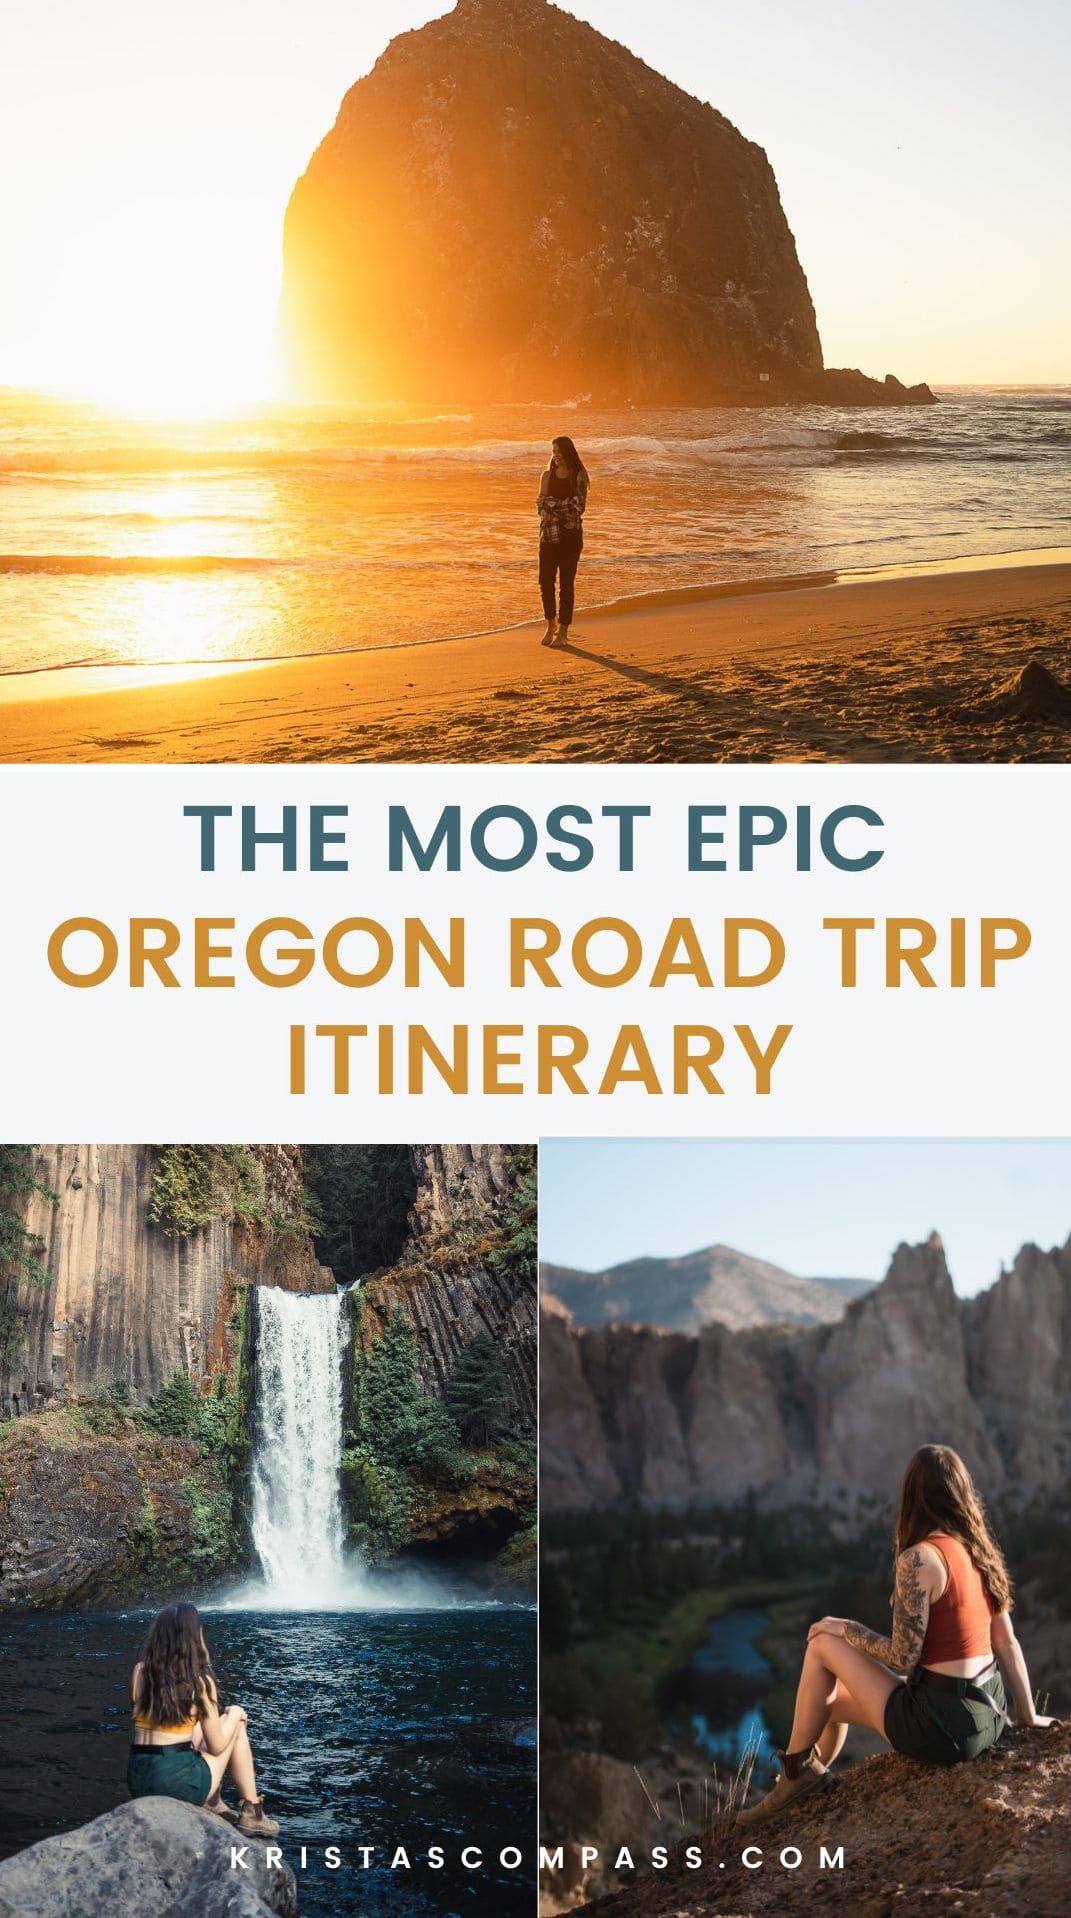 the most epic oregon road trip itinerary for when you road trip oregon pinterest pin